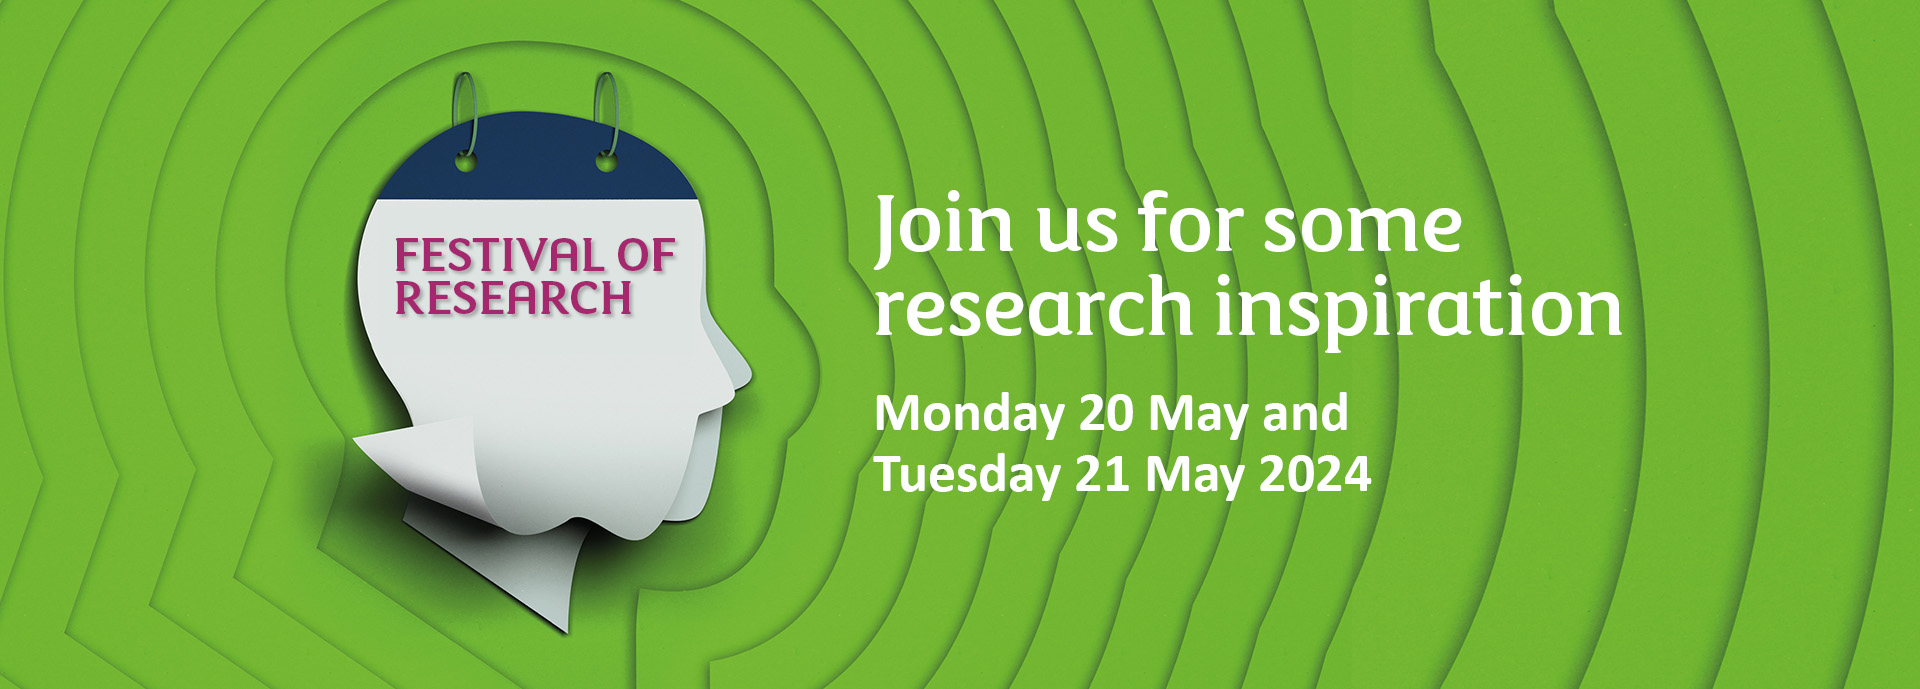 Outline of a face on a green background with text - Join us for some research inspiration, Monday 20 May, Tuesday 21 May 2024